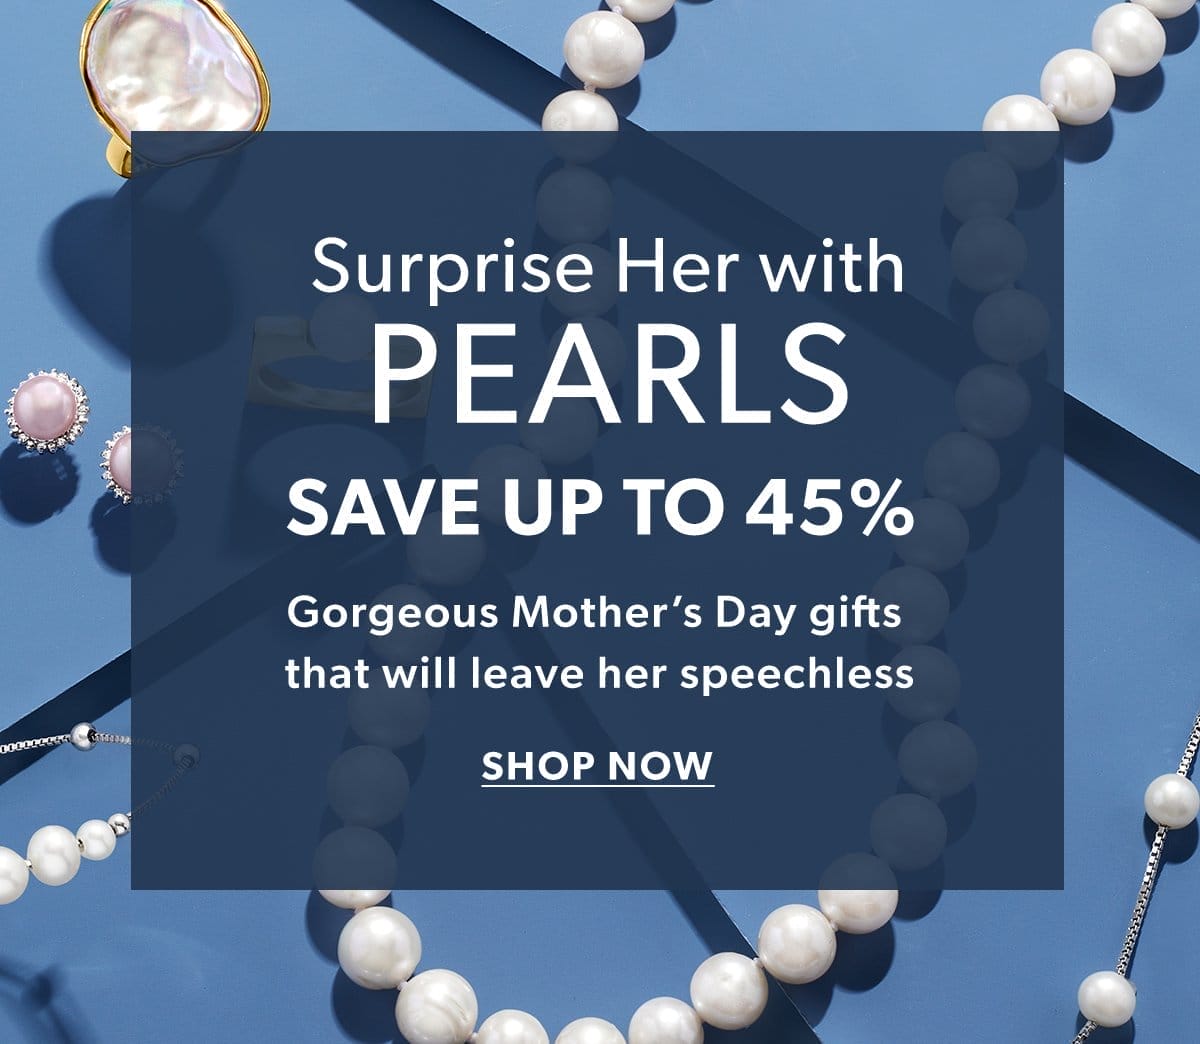 Surprise Her With Pearls. Save Up To 45%